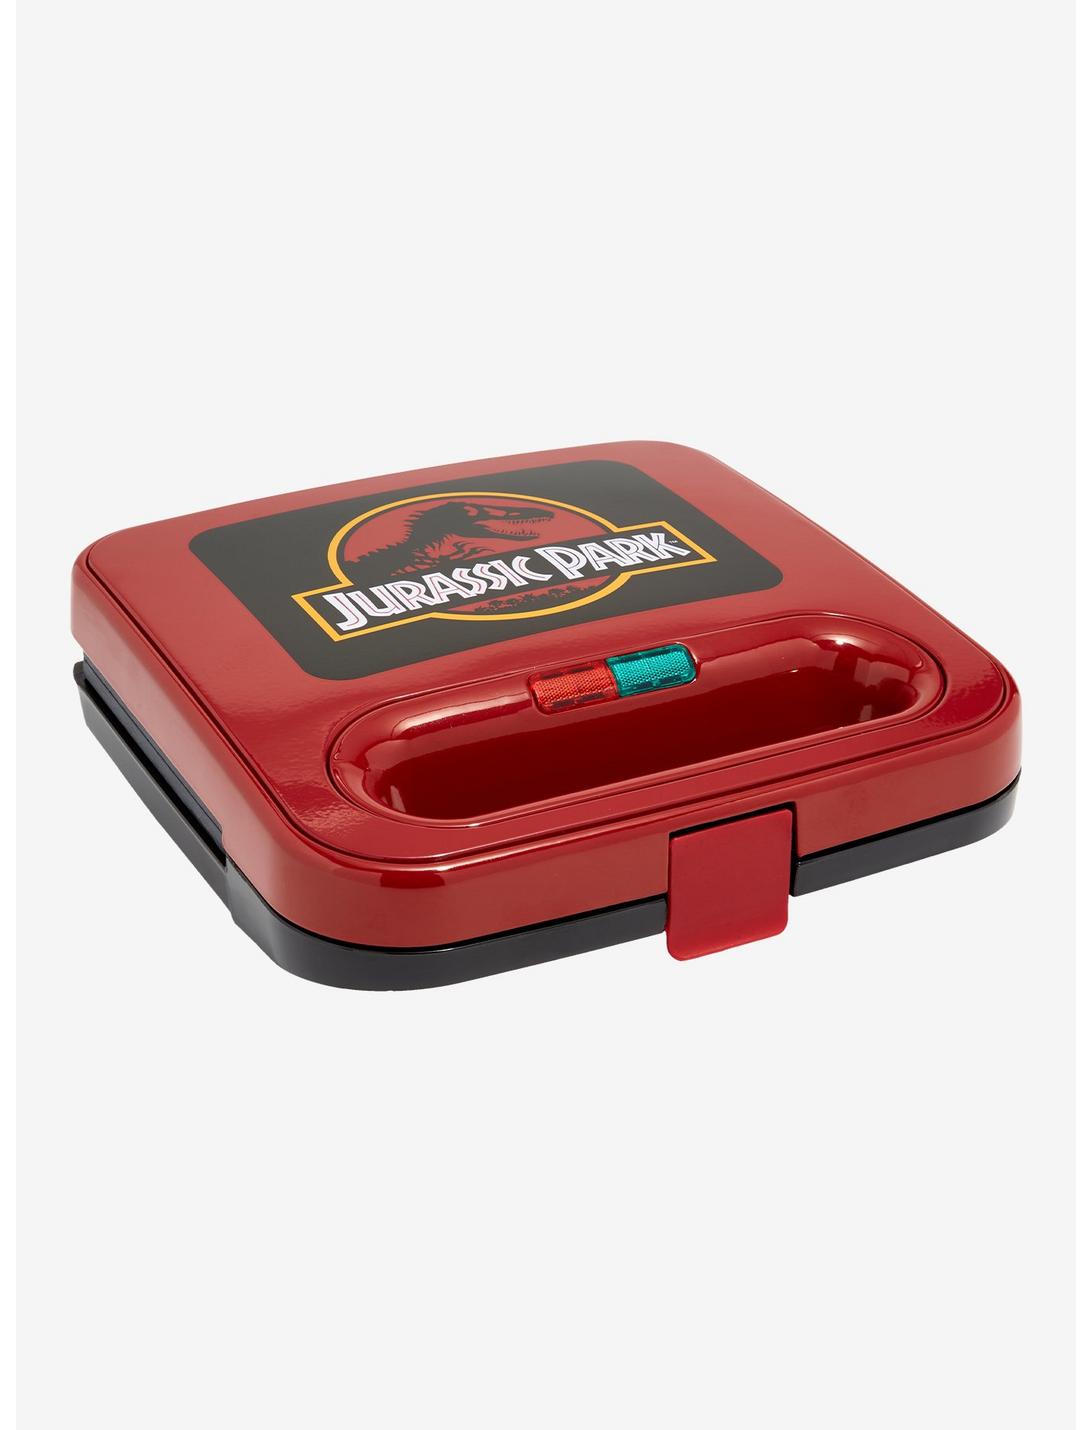 Jurassic Park Grilled Cheese Maker, , hi-res